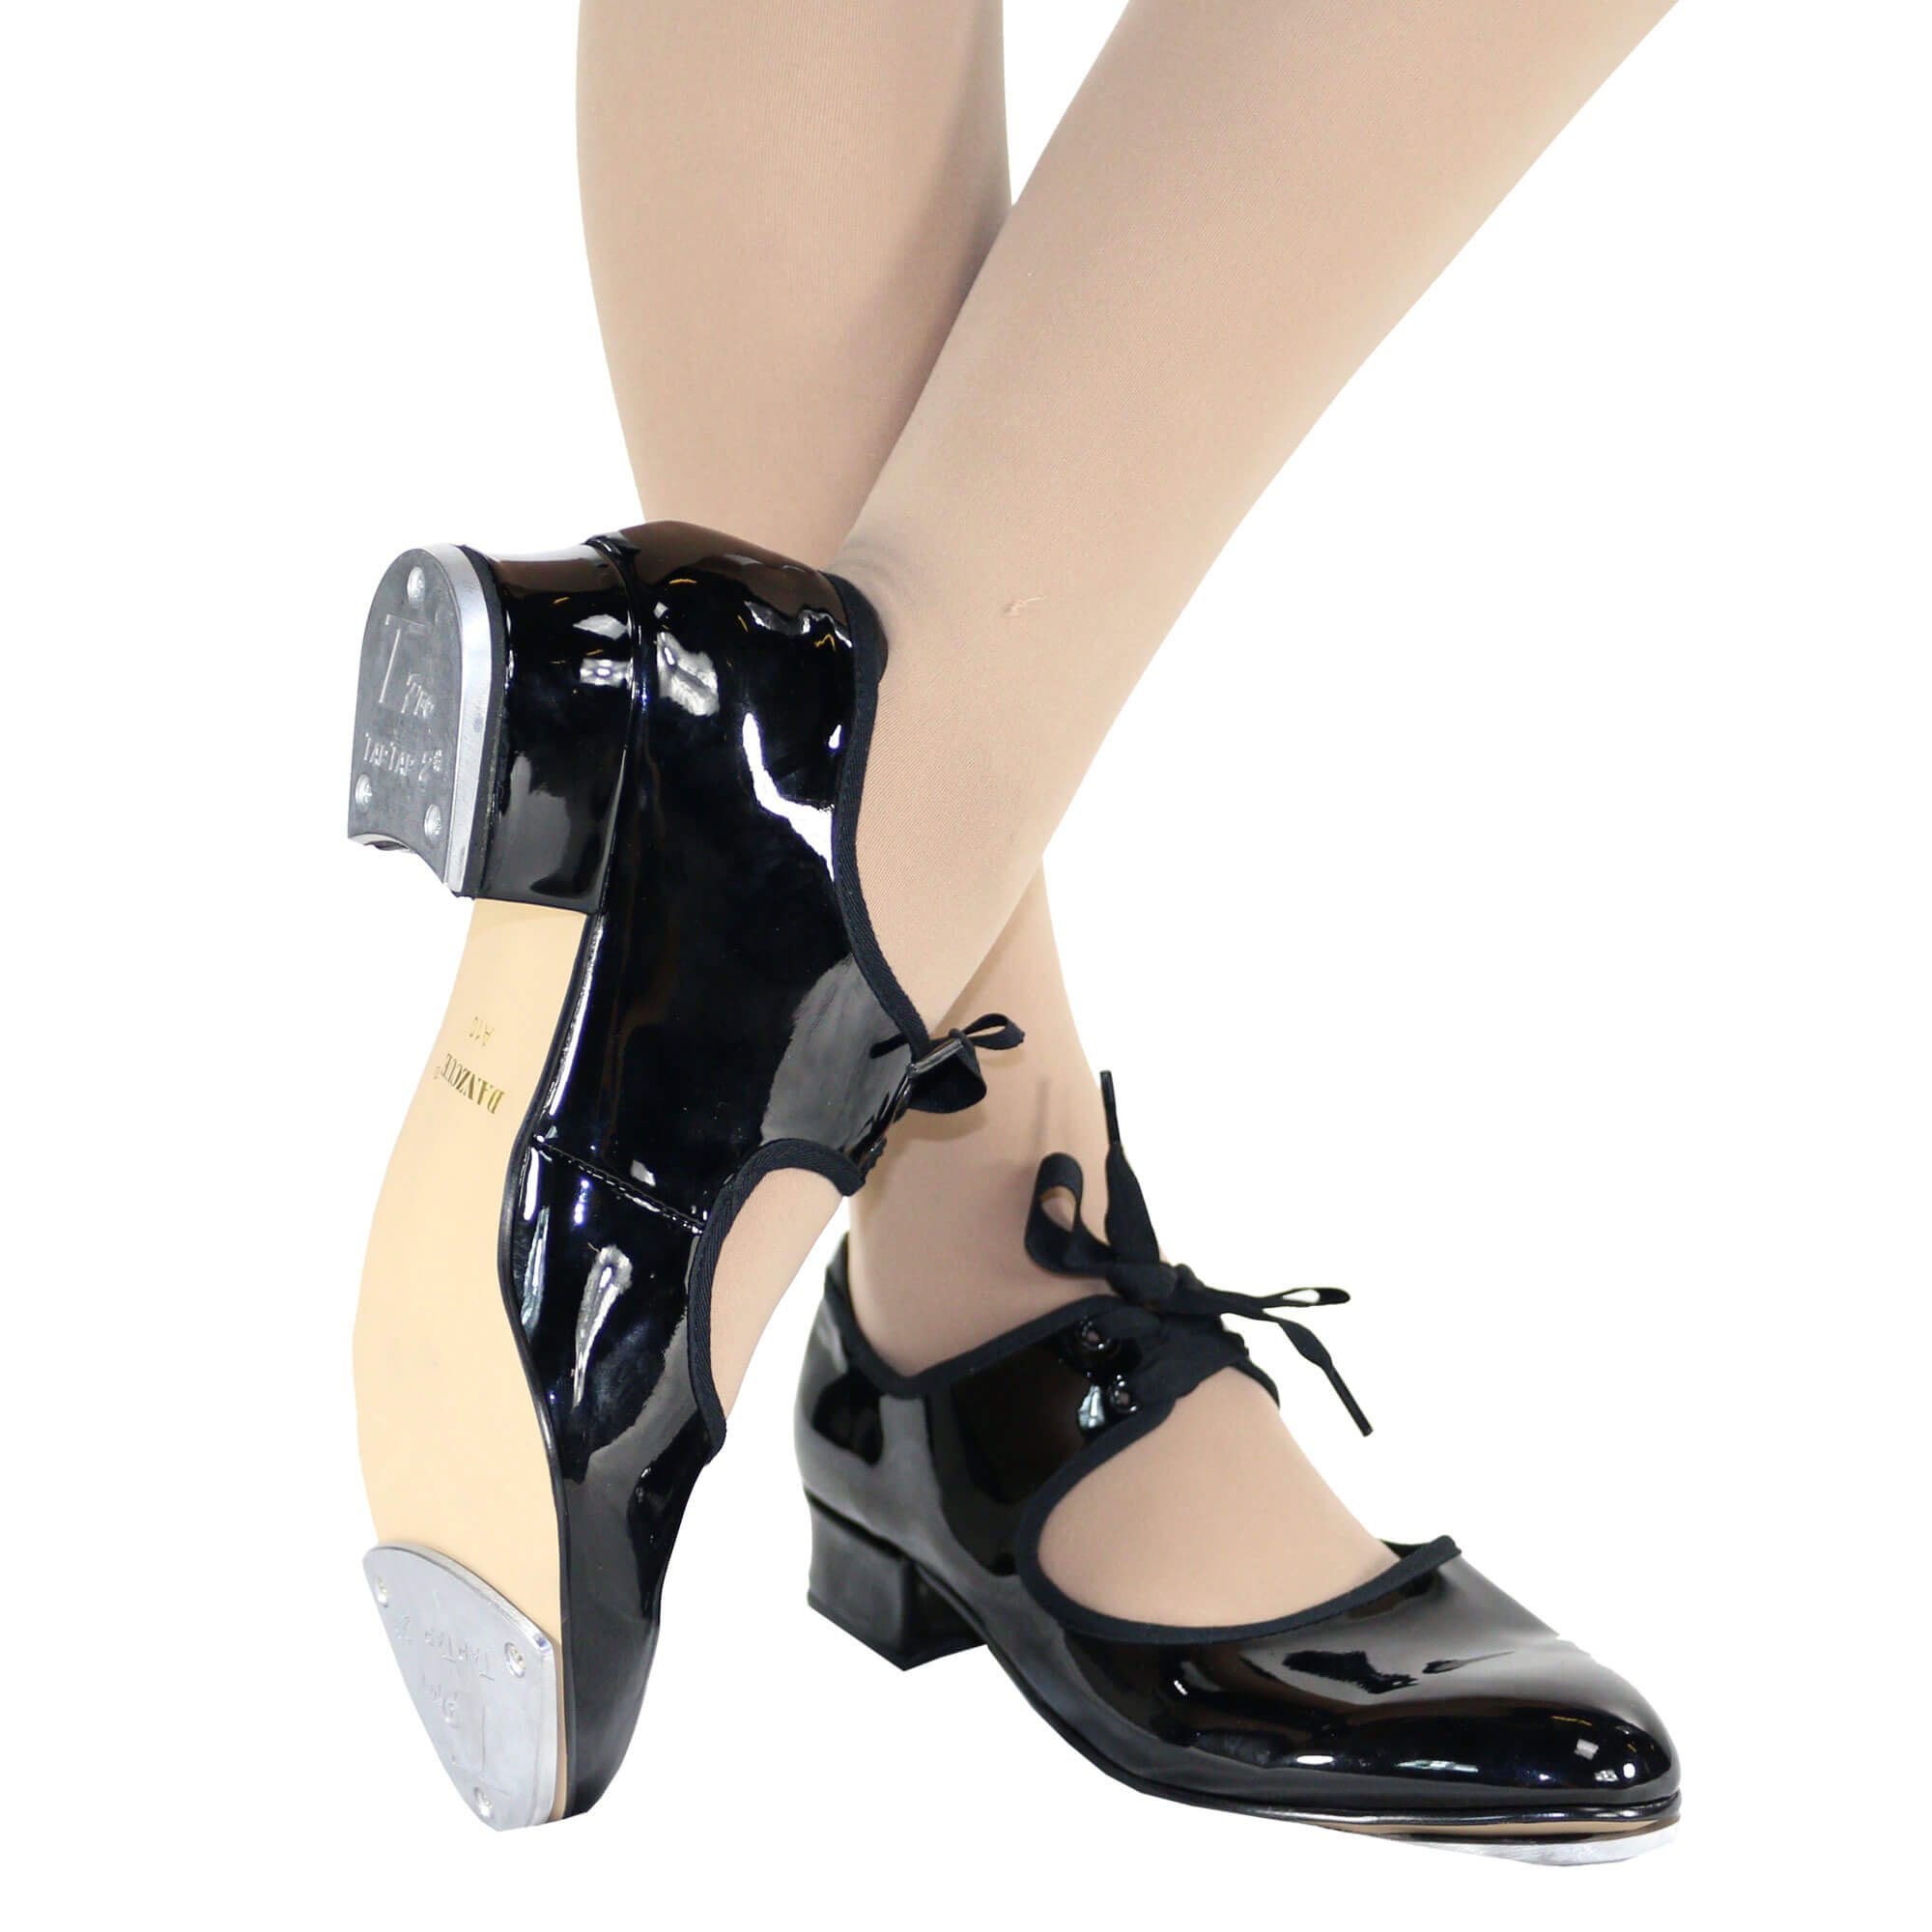 Danzcue Adult Patent Flexible Tap Shoes - Click Image to Close